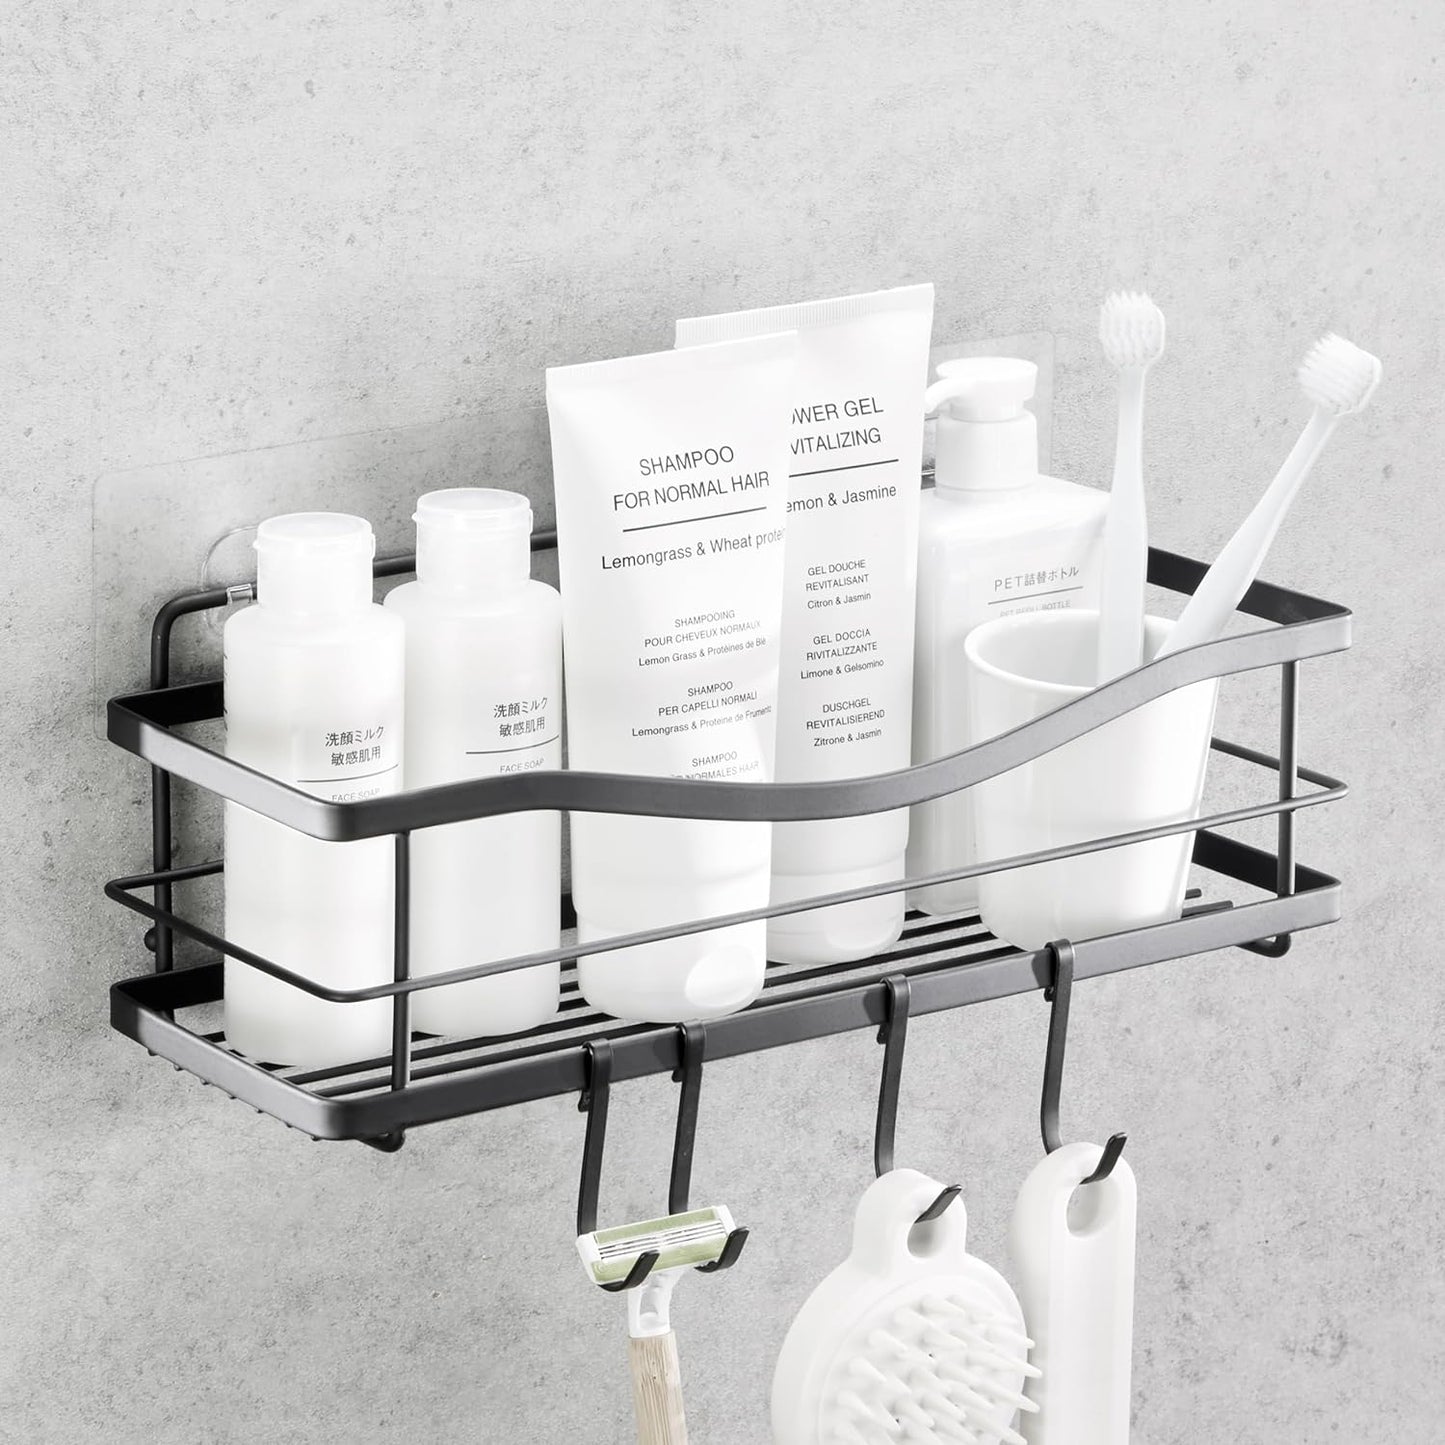 Premium Shower Shelf - Self Adhesive Shower Caddy with 4 Hooks - No Drill Large Capacity Stainless Steel Rack - Aesthetic Organizer for Bathroom Wall Decor - Matte Black